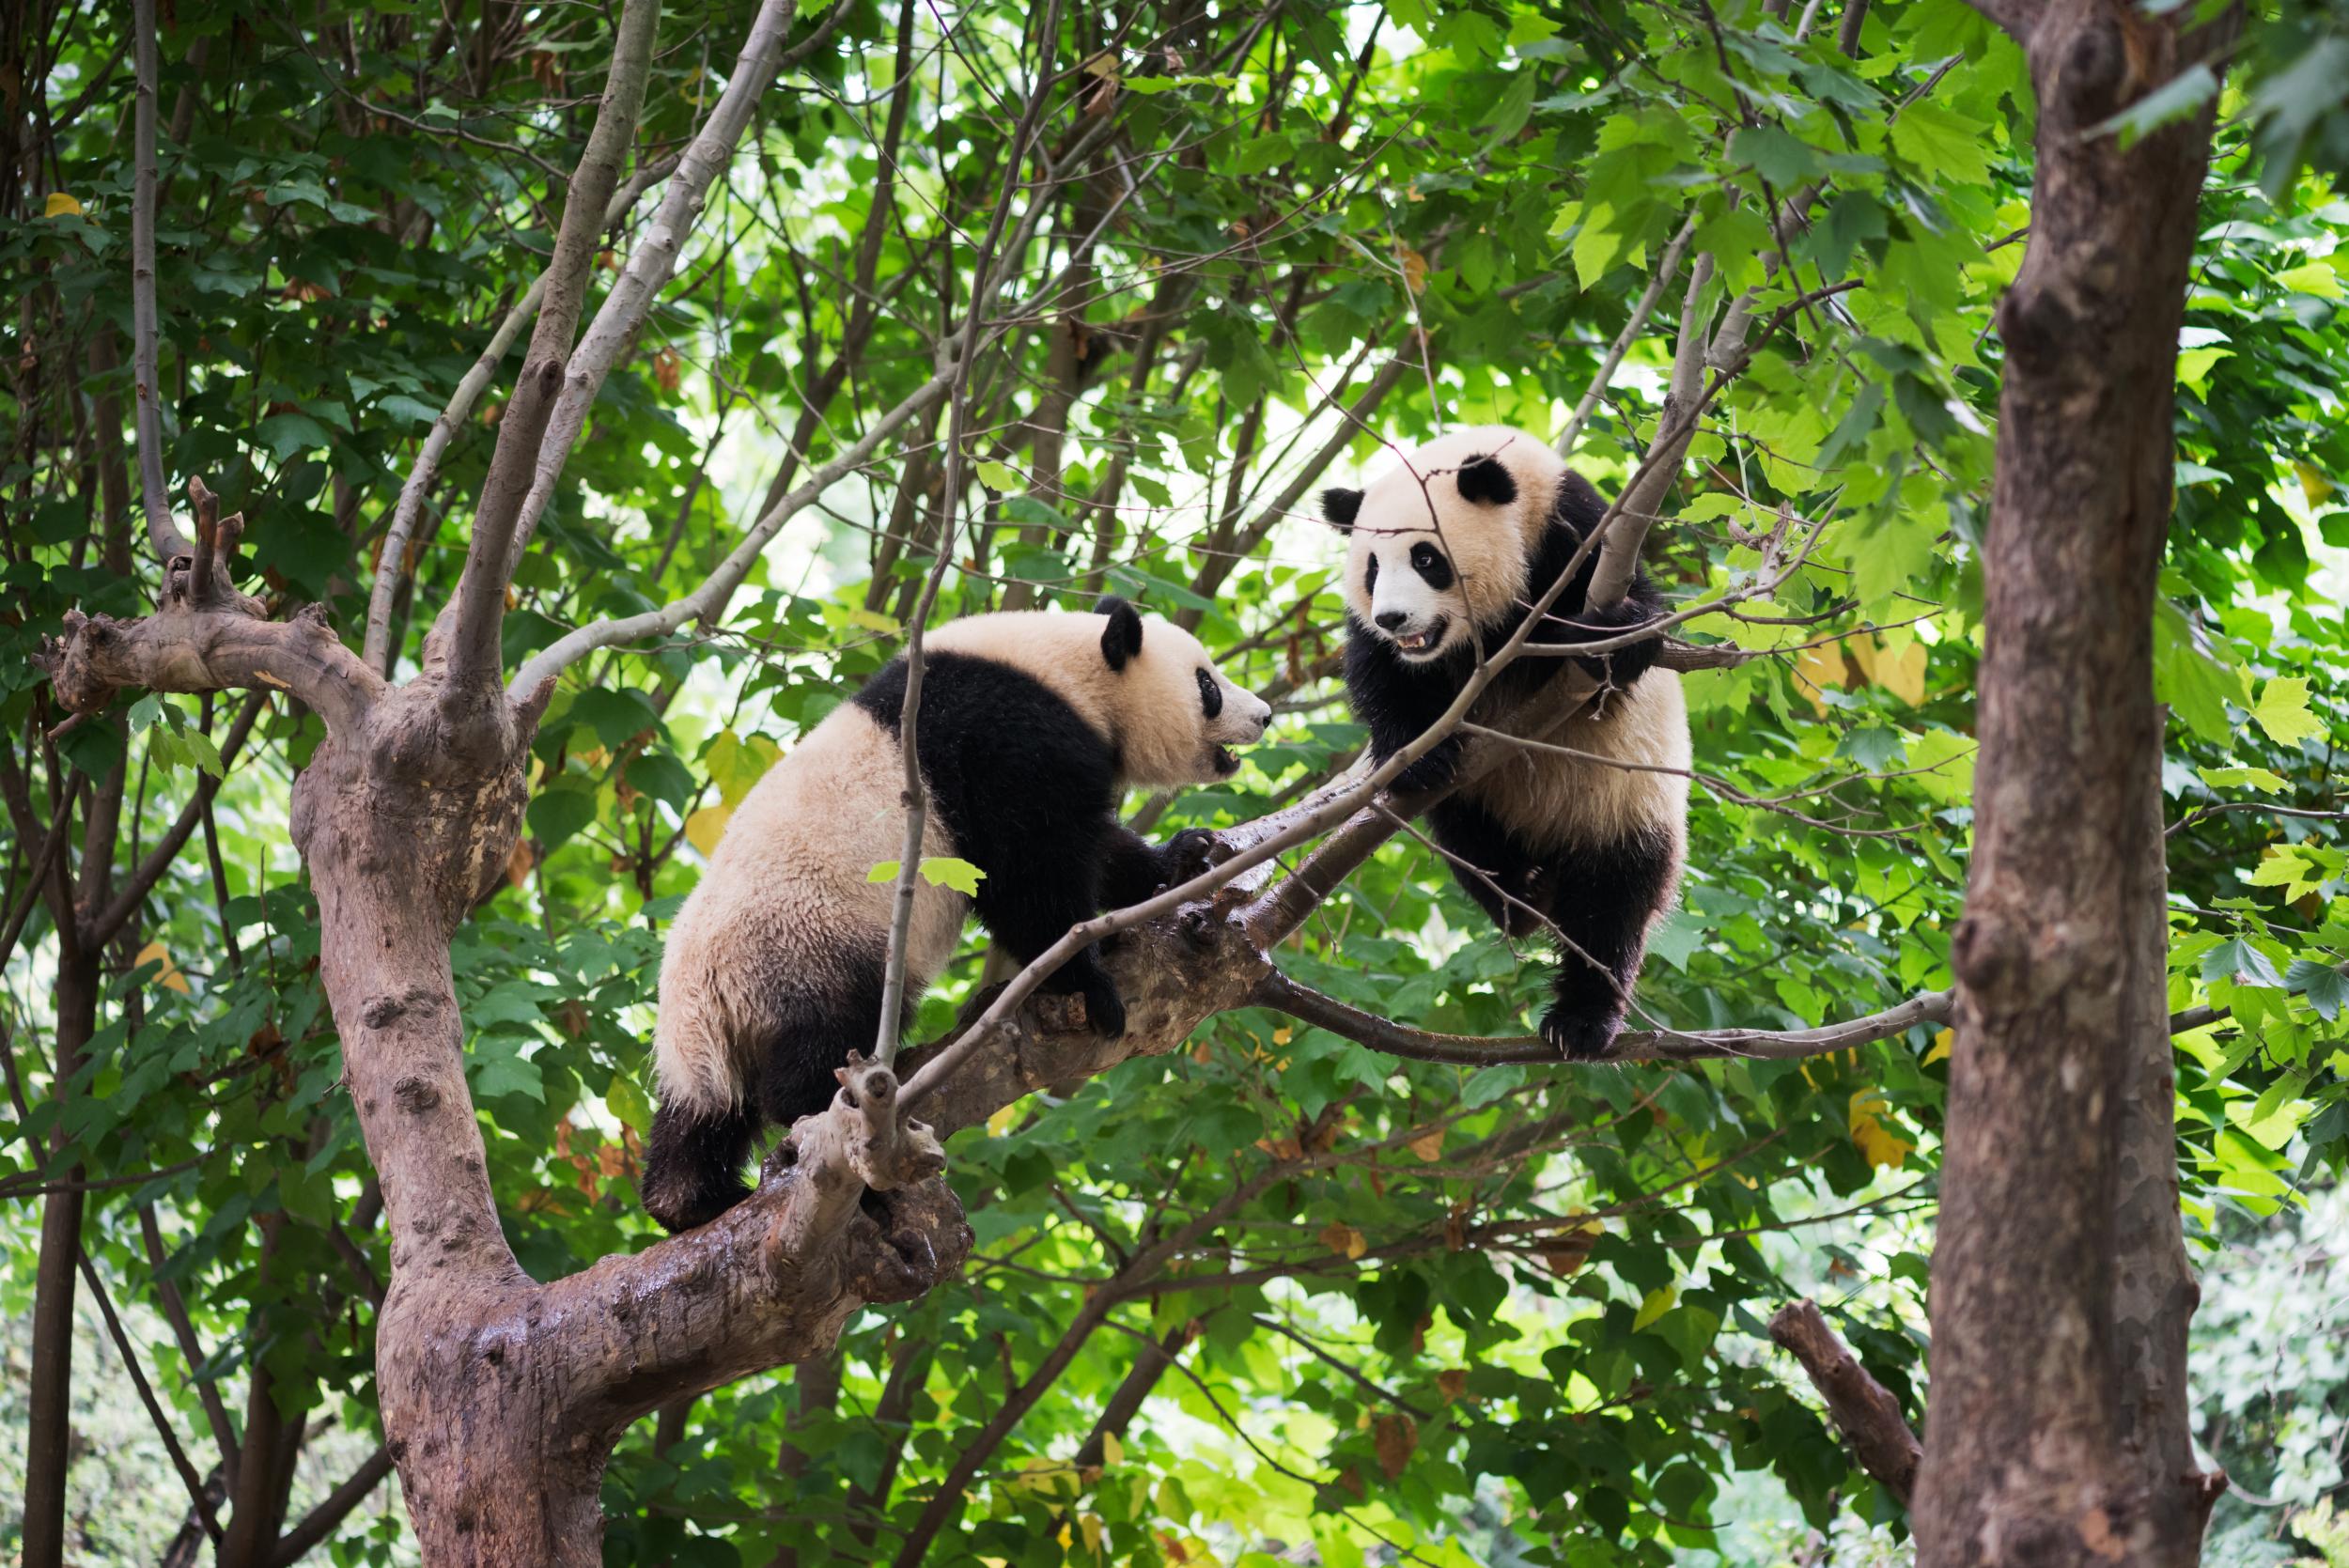 Chengdu, home of pandas, now allows visa-free transit for almost a week